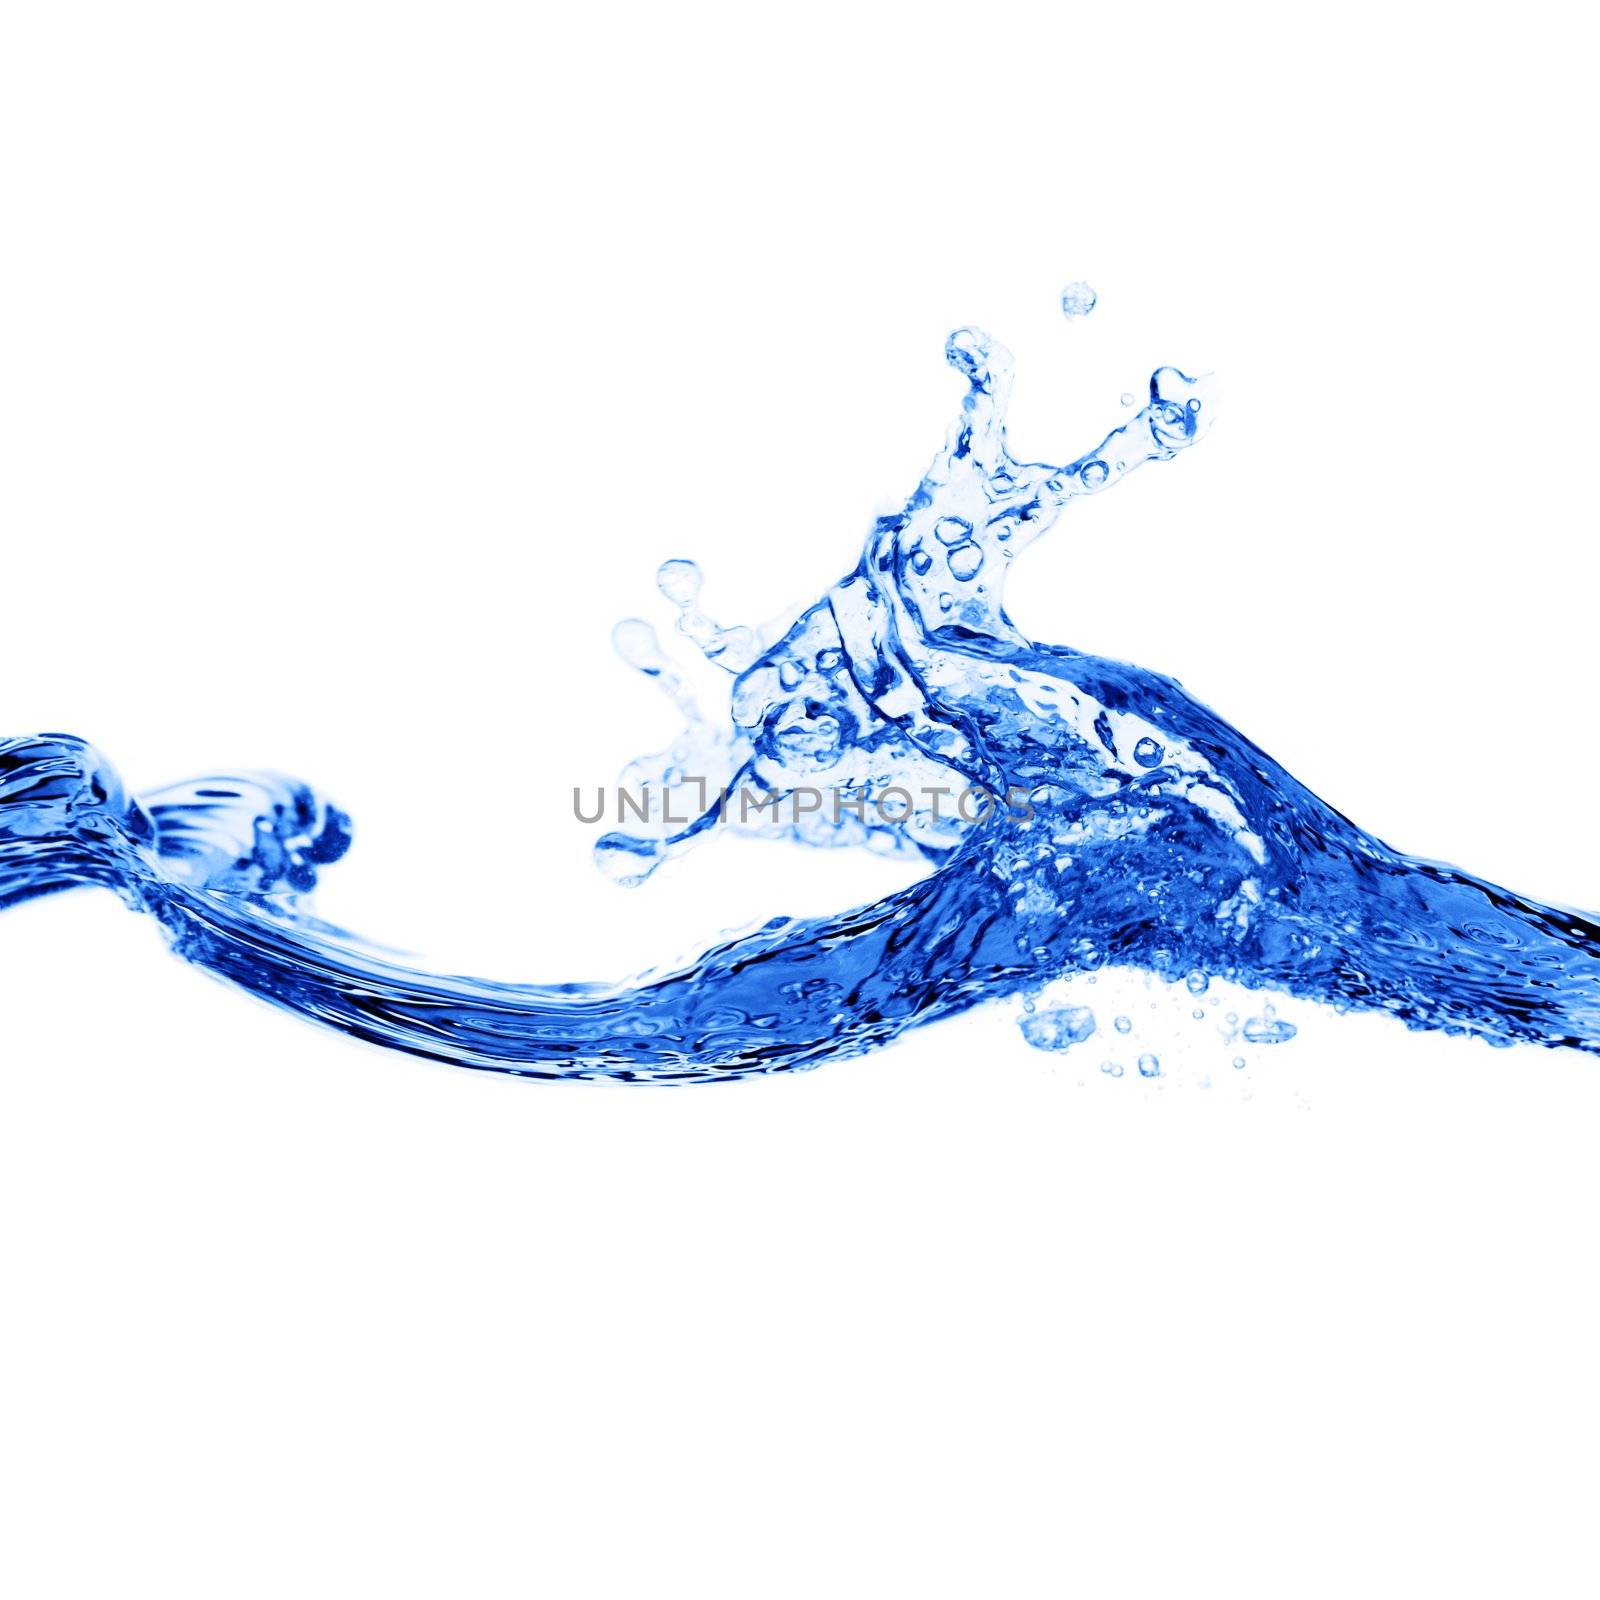 Crisp, clean, blue water photographed against a white background.